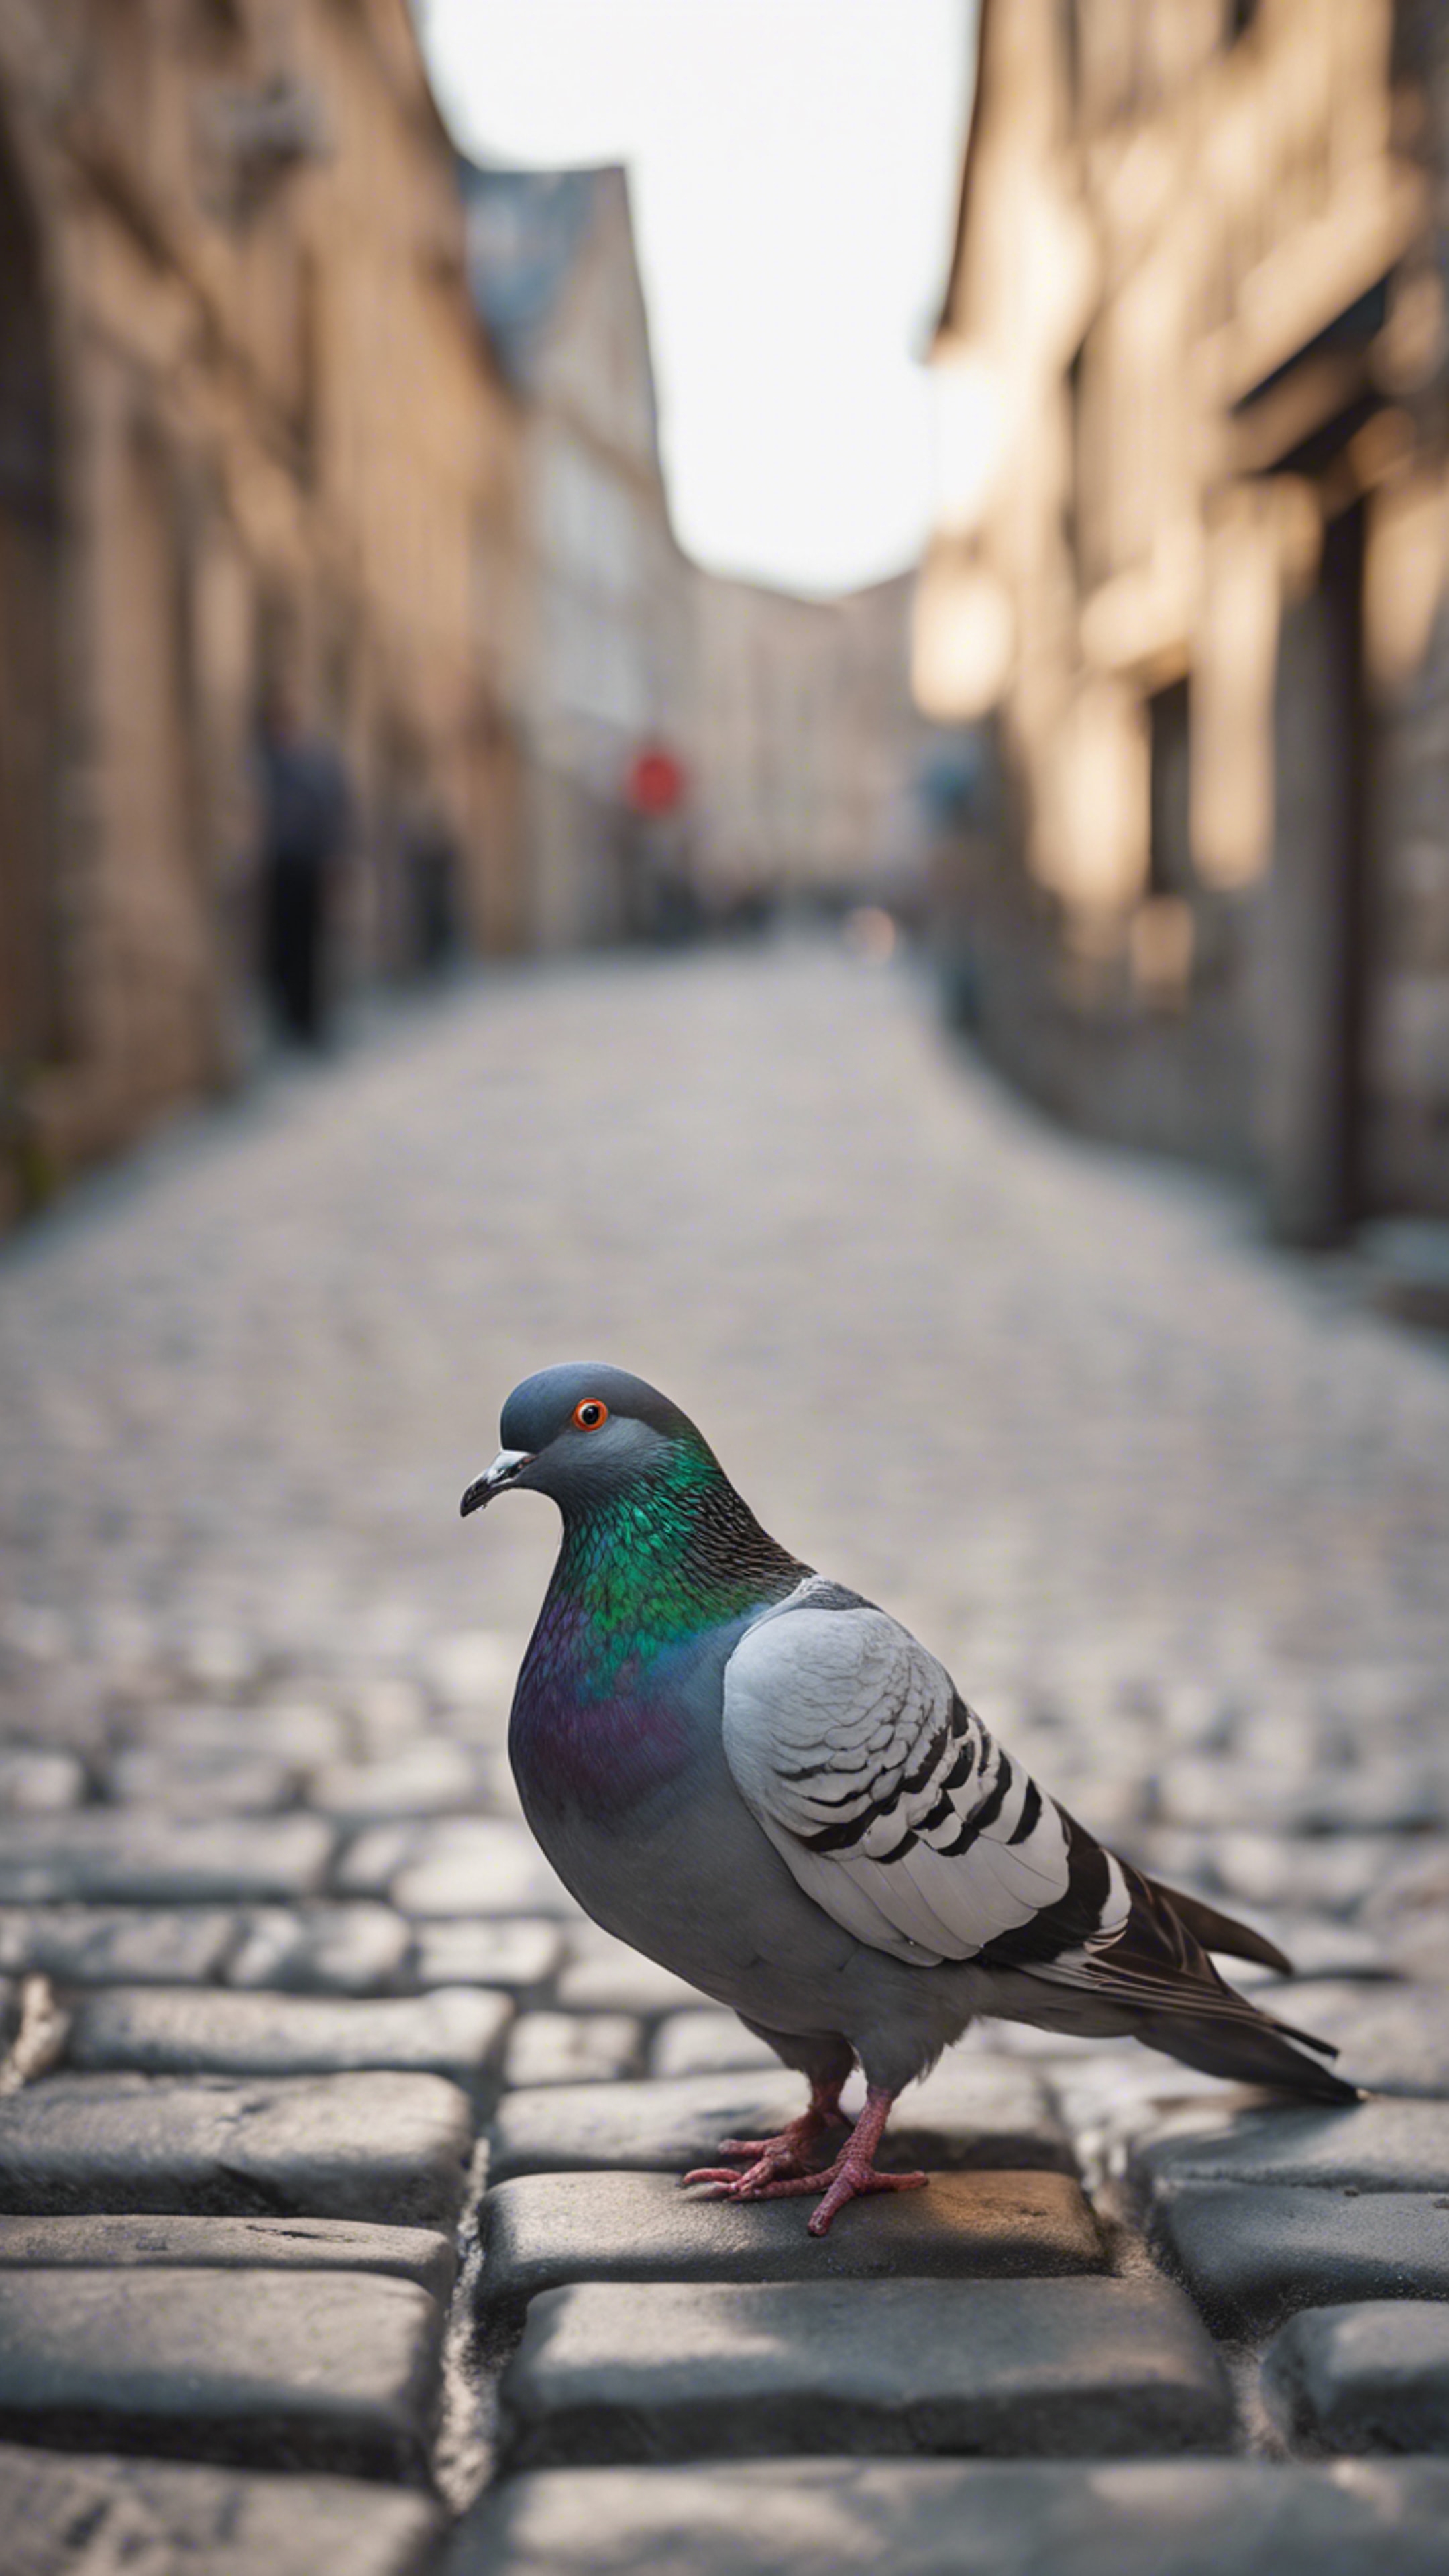 A pigeon standing on cobblestone street in the middle of an old city, its beautiful light gray plumage glistening. Fondo de pantalla[03a93bb4226c4140ad33]